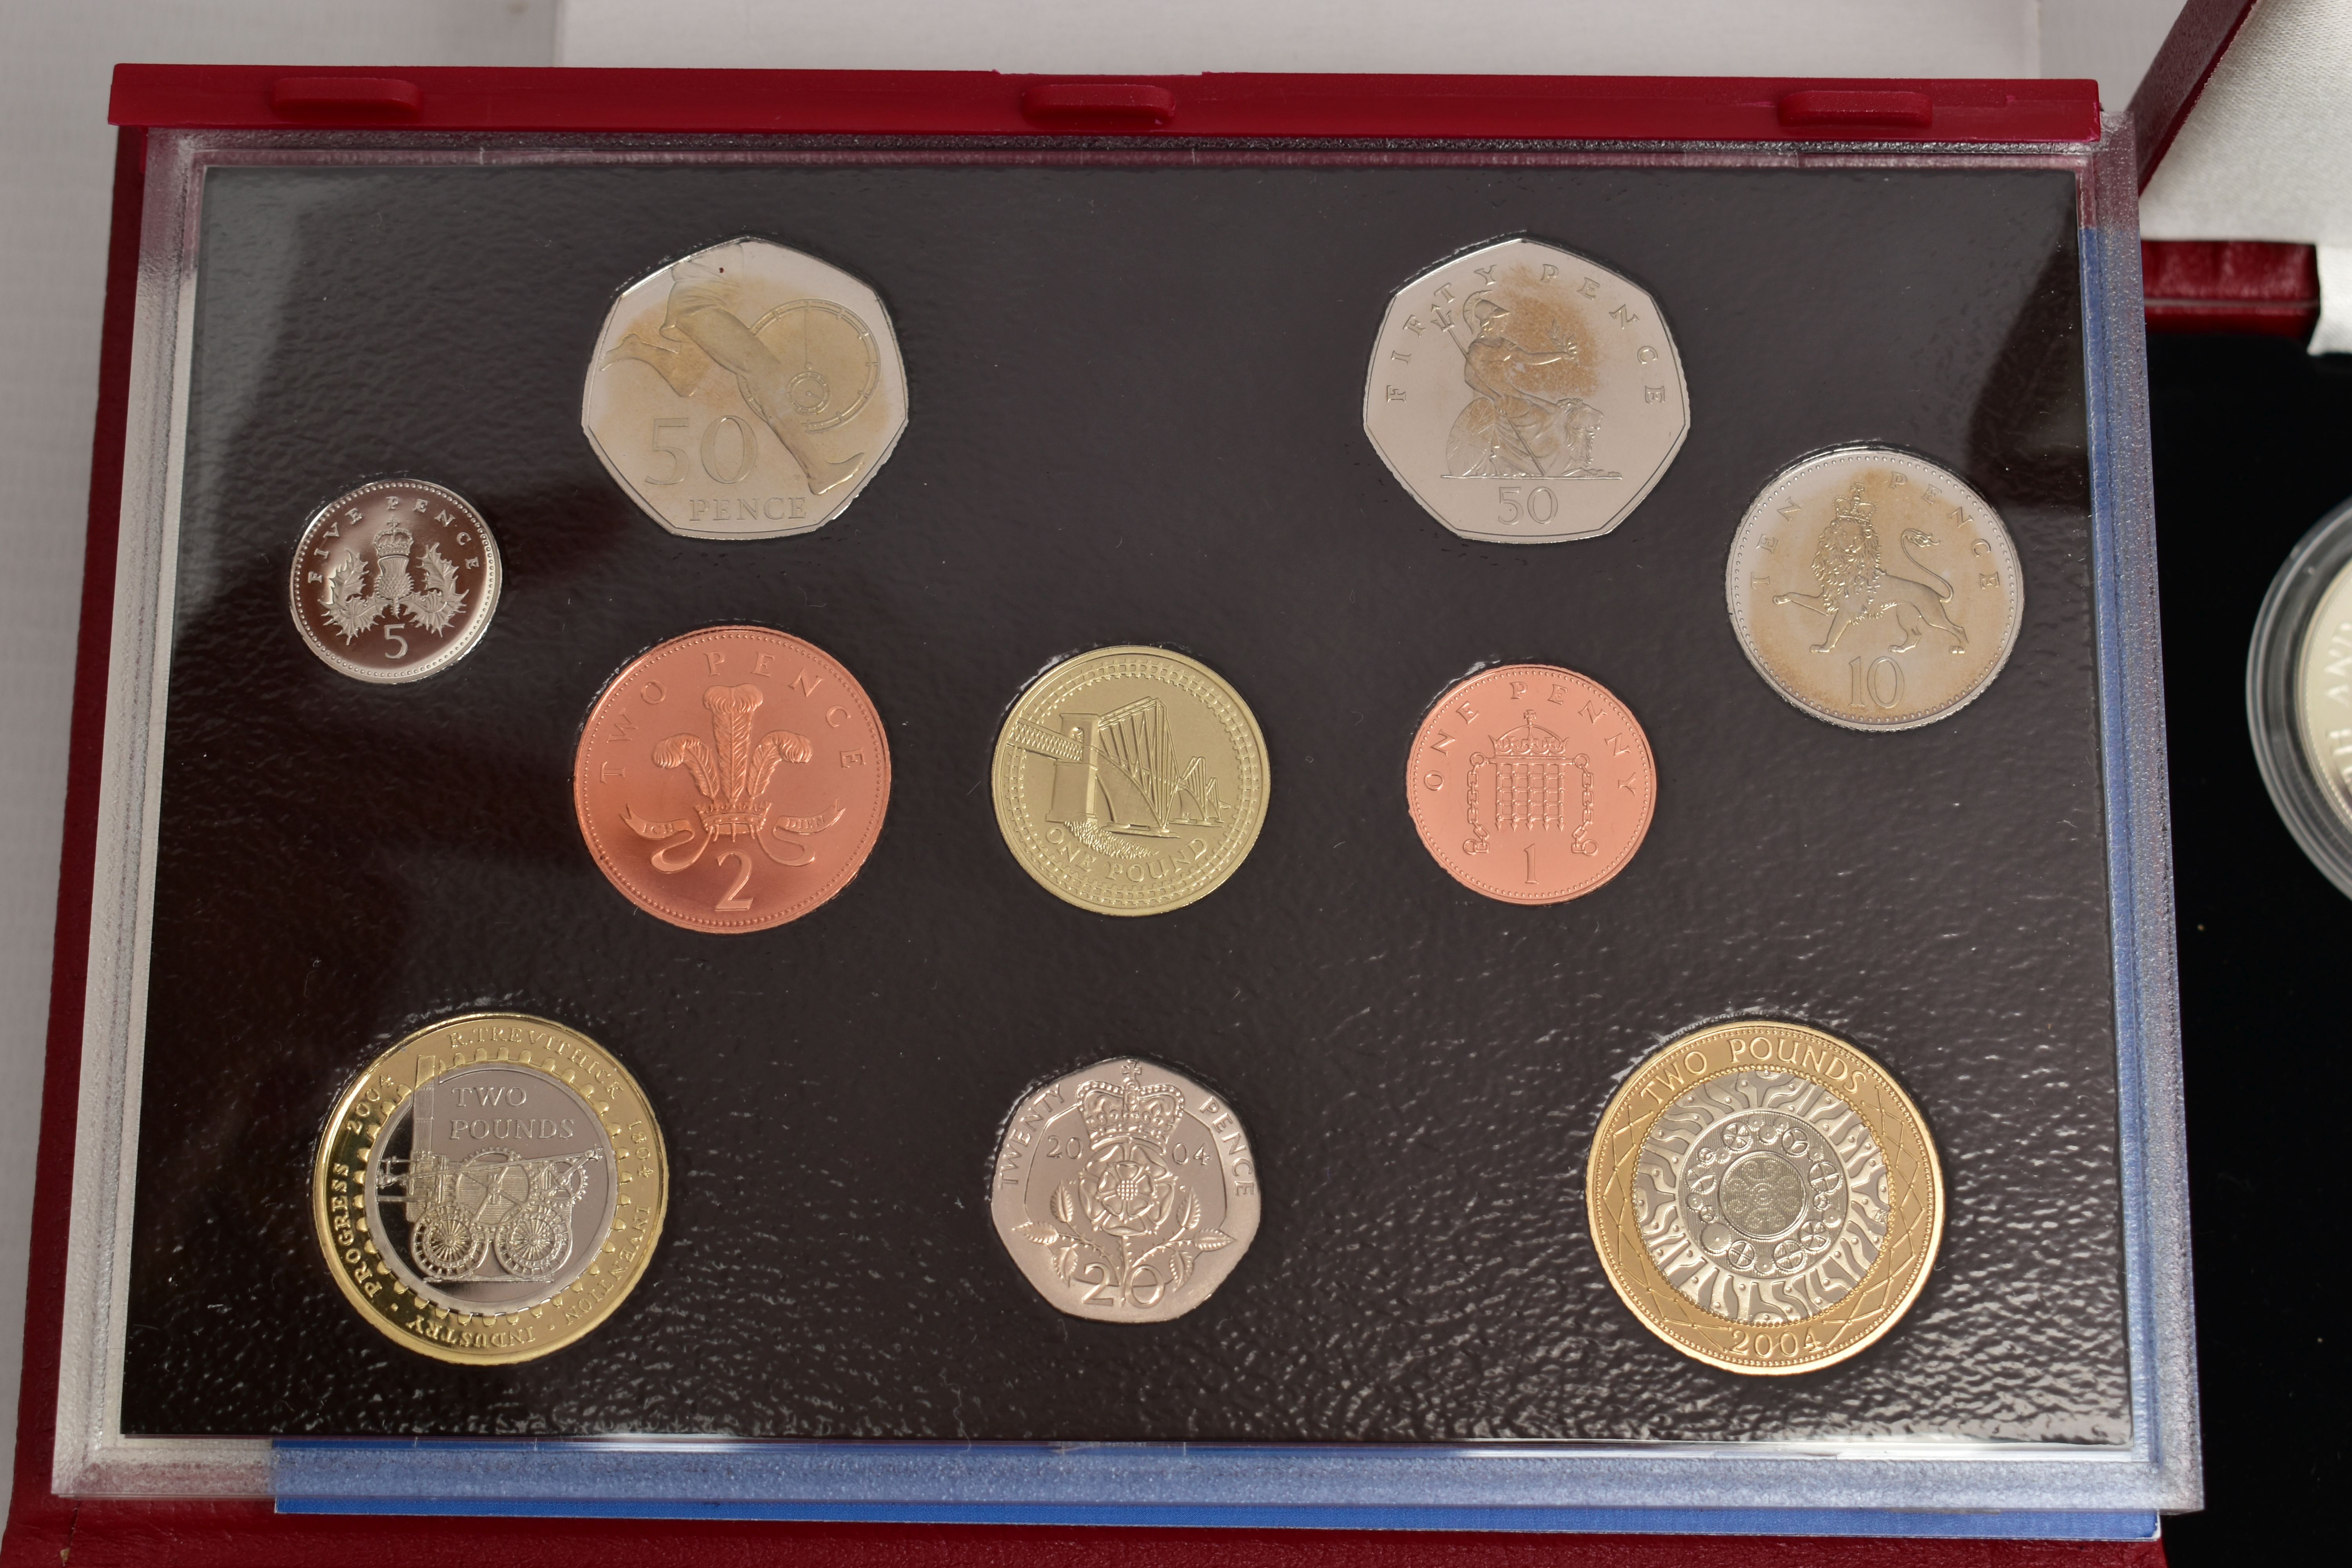 A ROYAL MINT QUEEN ELIZABETH II 1972-1981 SILVER PROOF CROWN COLLECTION, of four silver proof coins, - Image 8 of 9